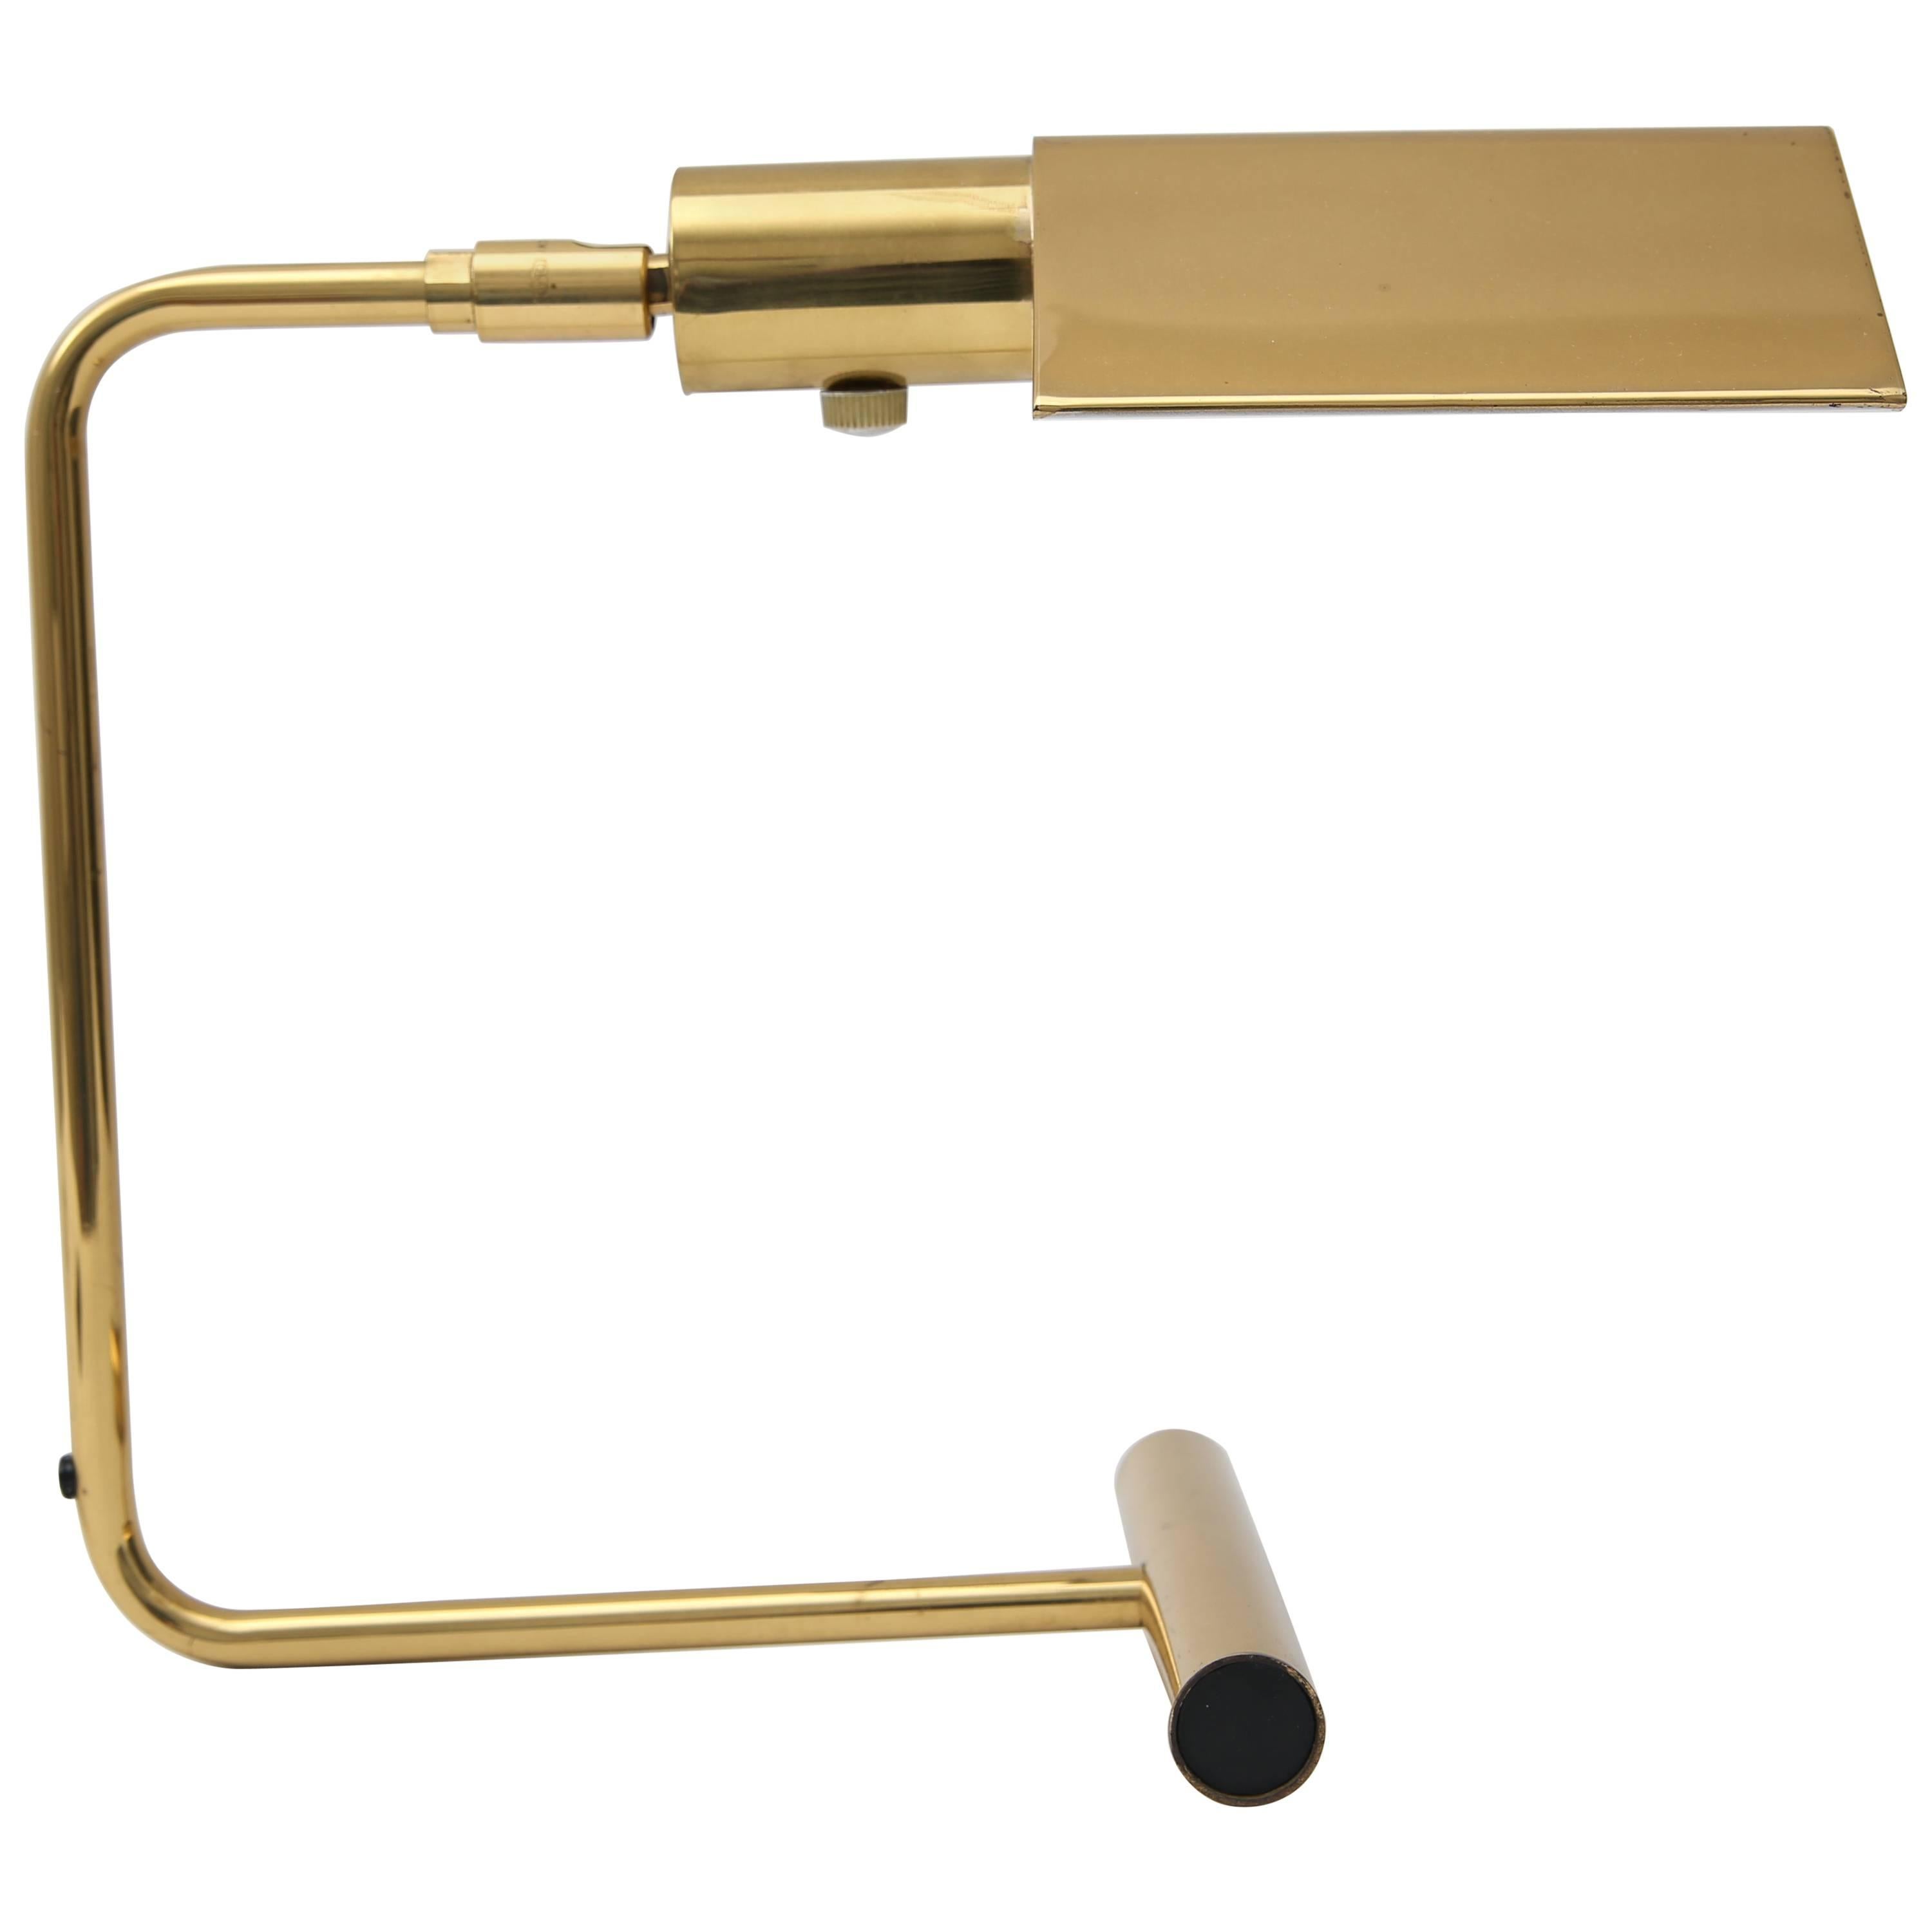  Polished Brass Table Lamp with Pharmacy Shade